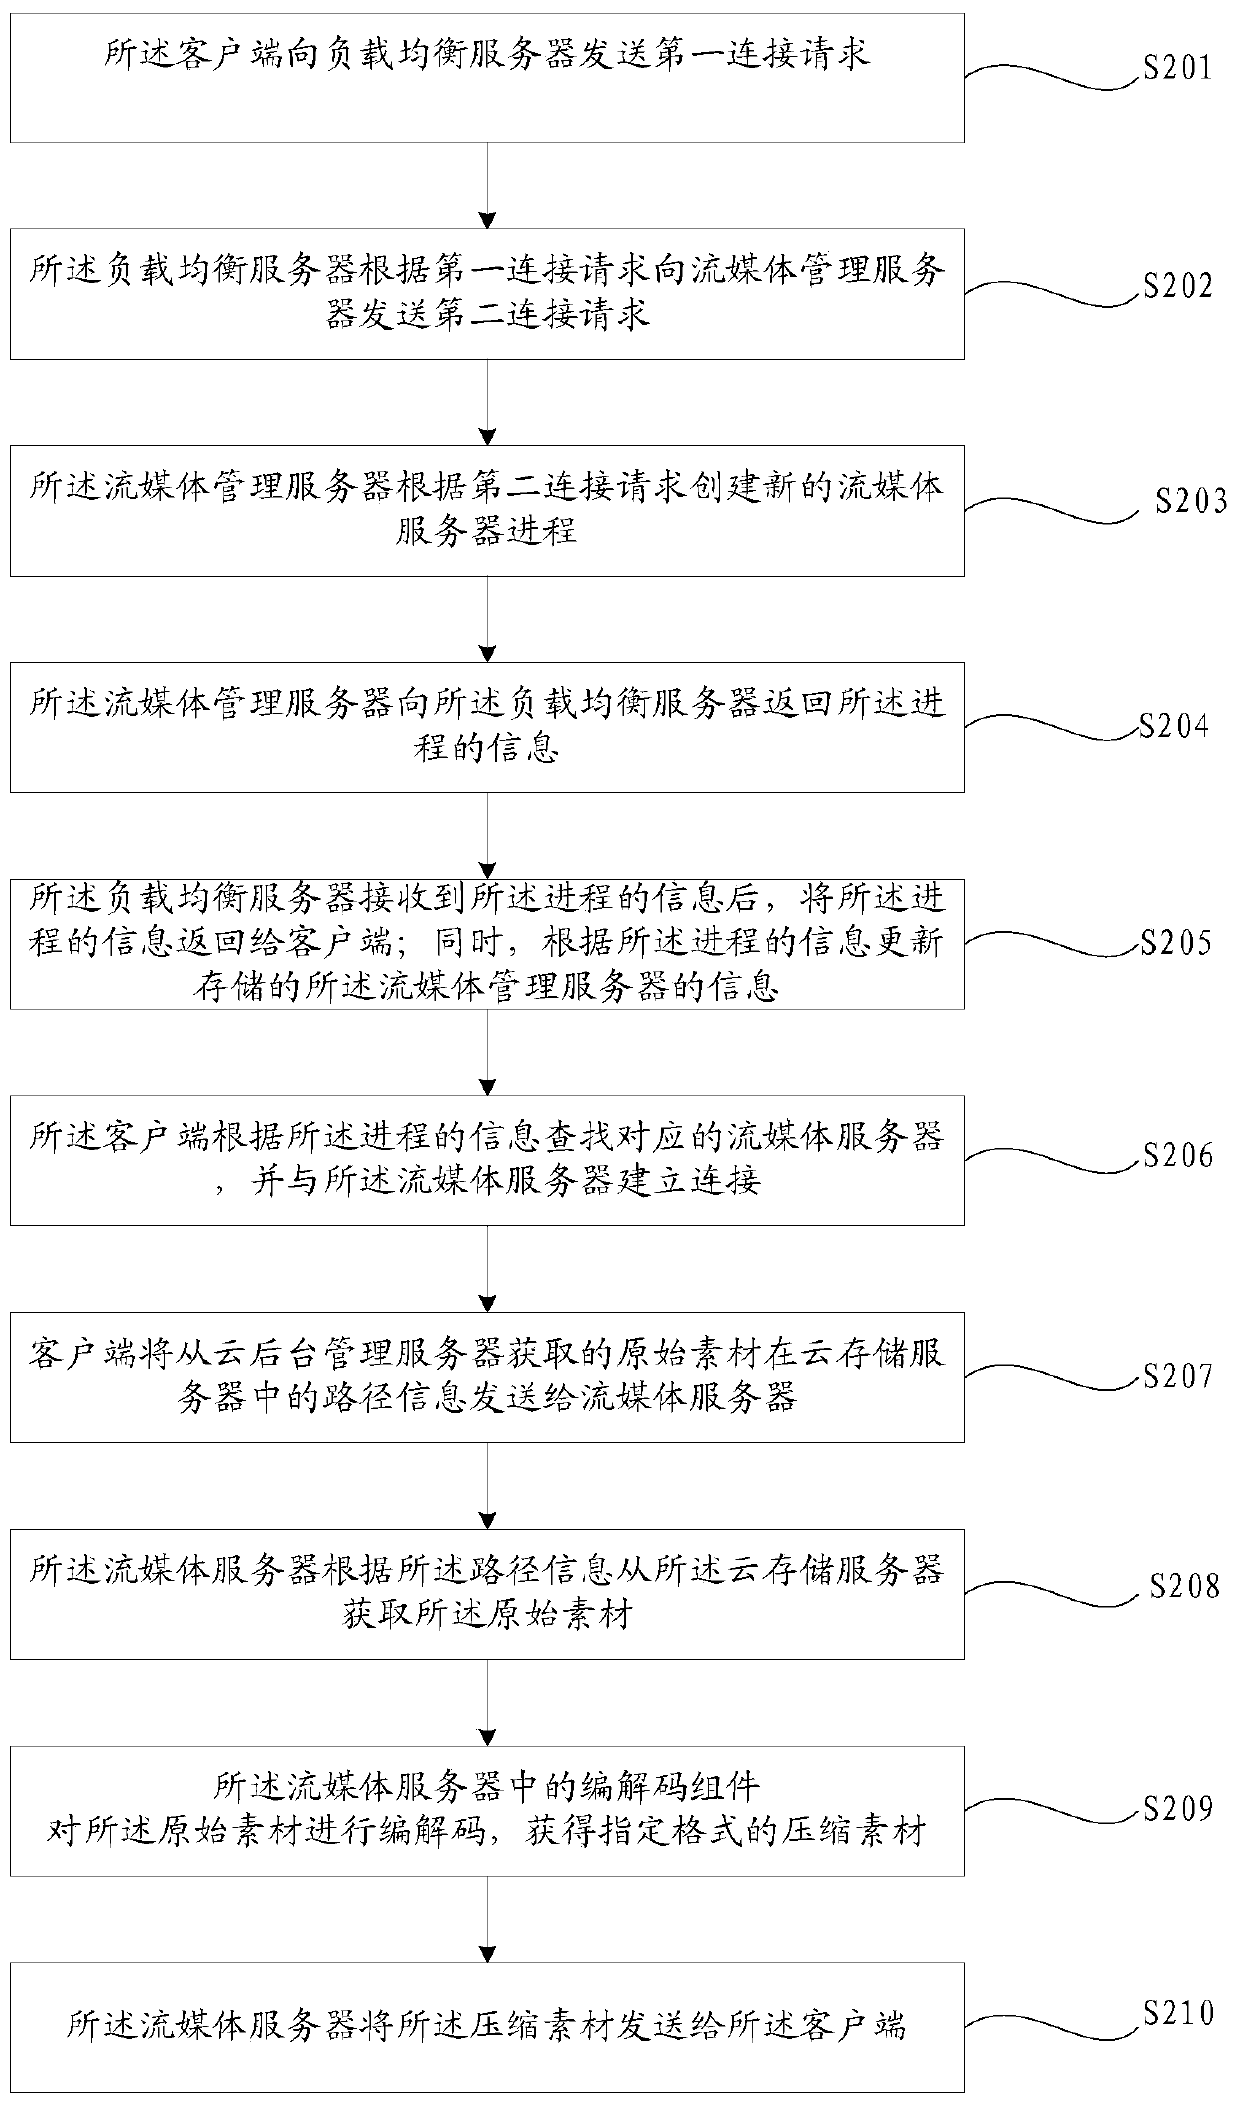 A streaming media server cloud data processing method and device